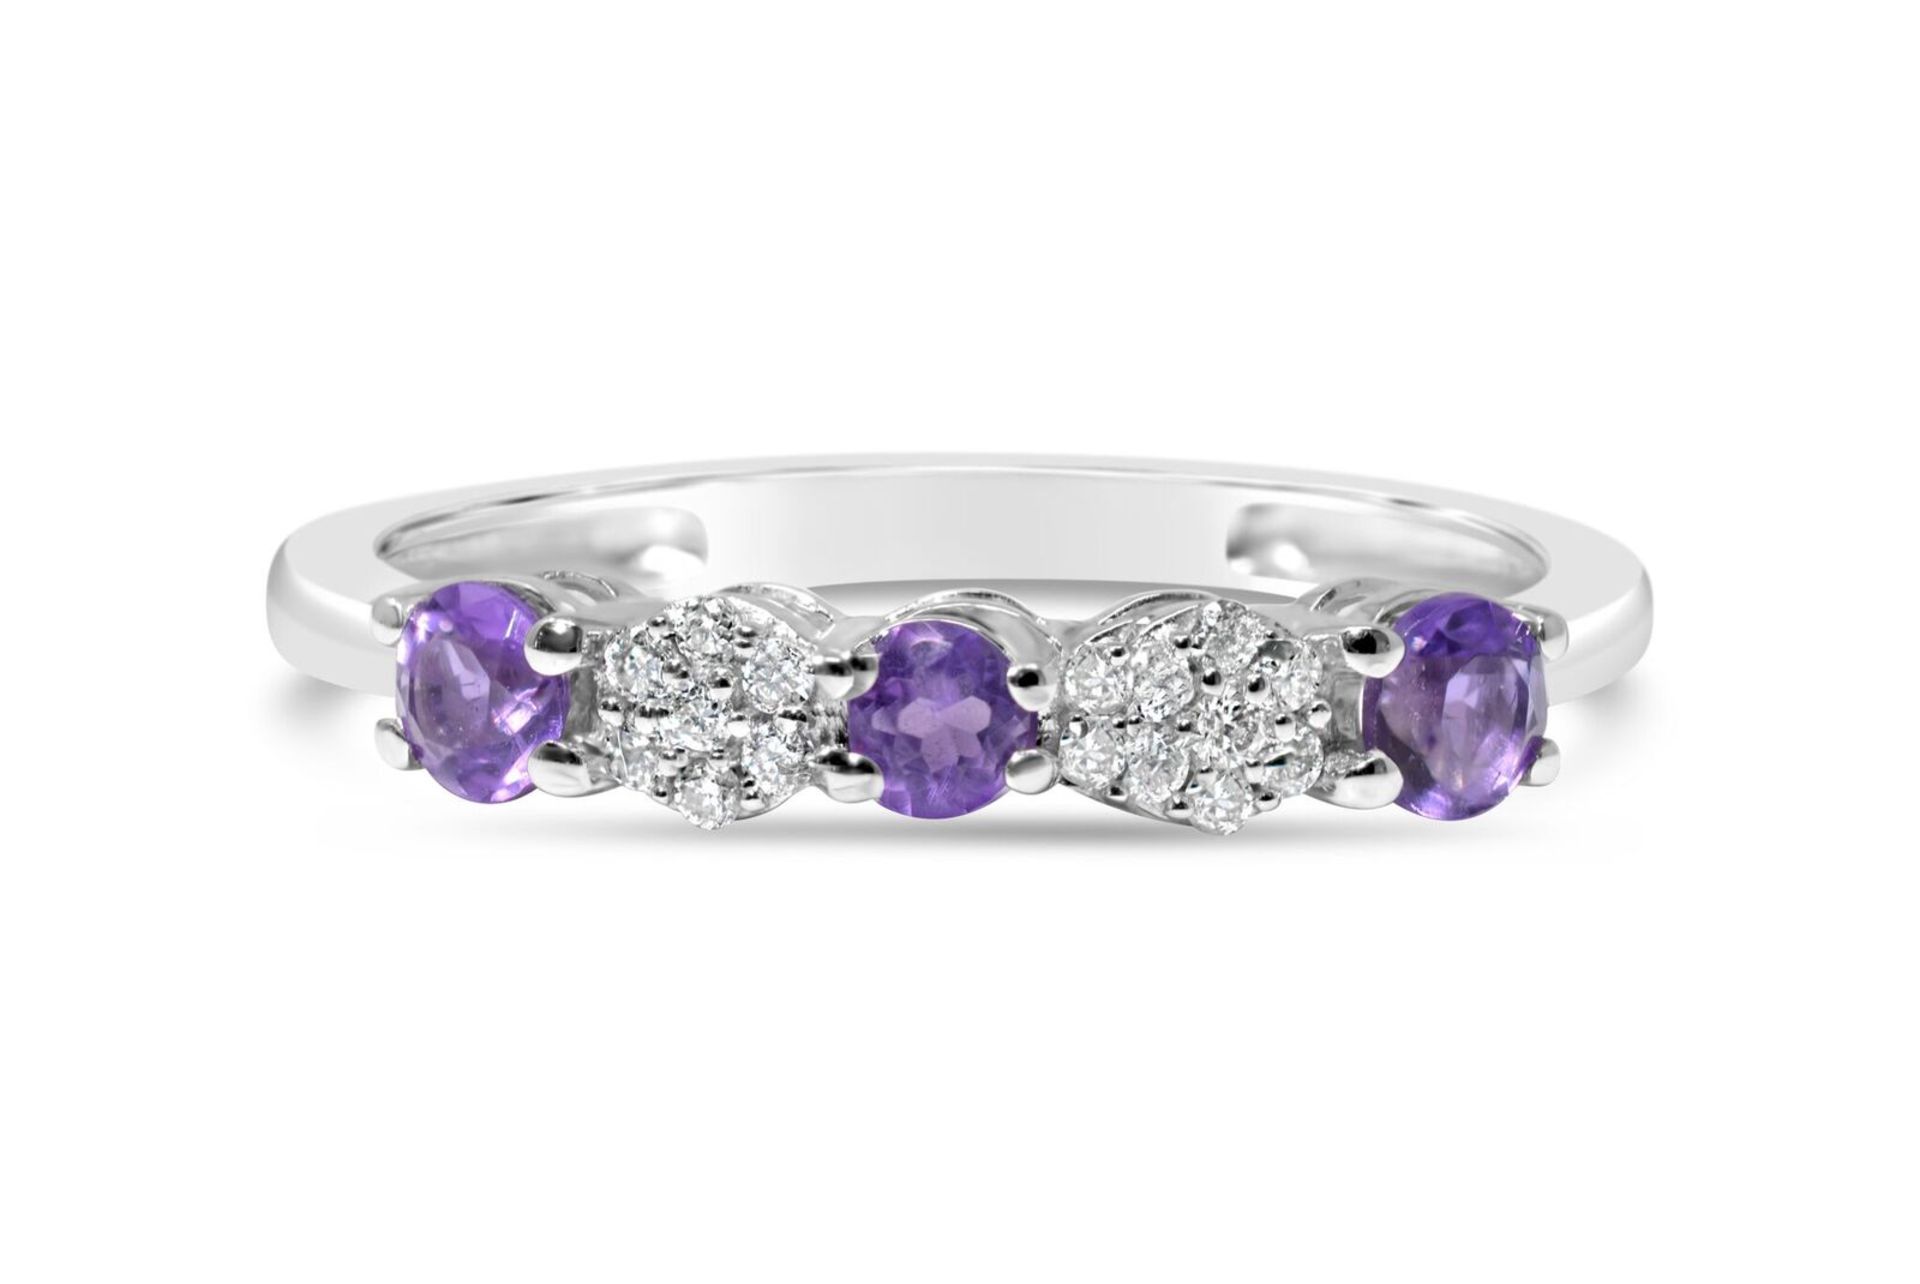 Amethyst and Diamond Eternity Ring, 9ct White Gold RRP £749 Weight 1.48g, Diamond Weight 0.07ct, - Image 3 of 3